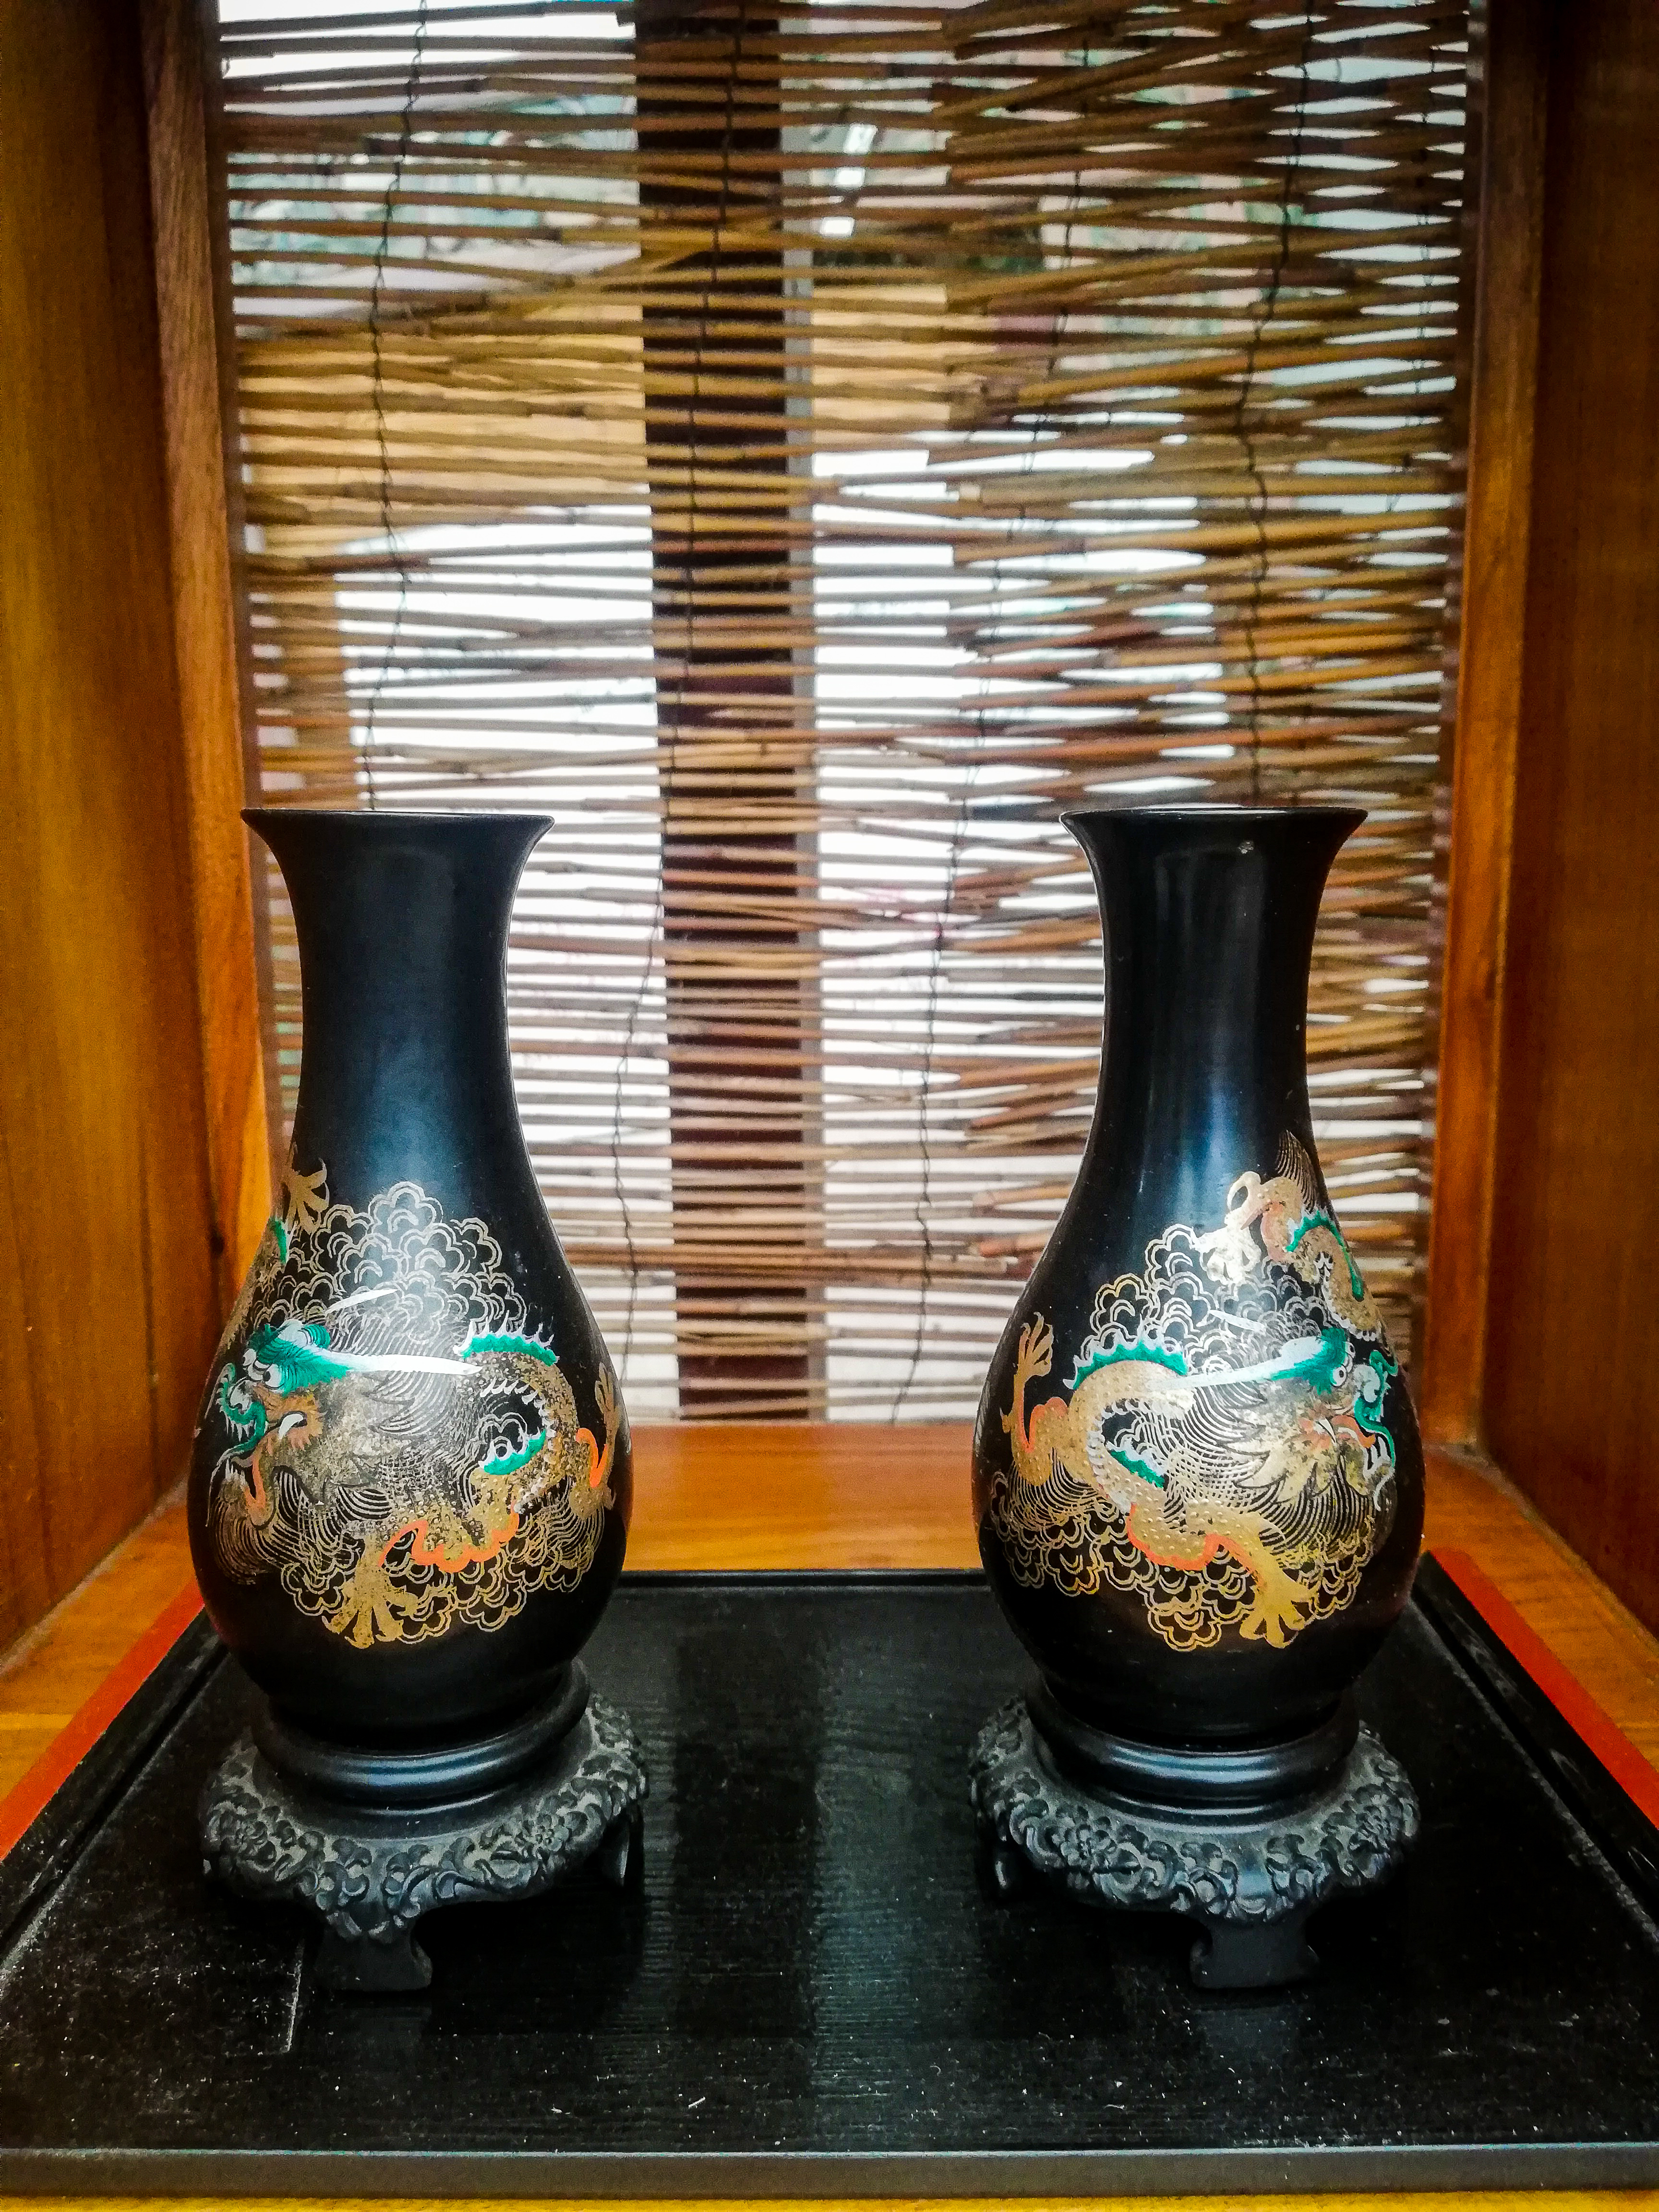 Chinese Modern Ceremonial Offering Vases <br> Dragon Motif <br> $45 pair